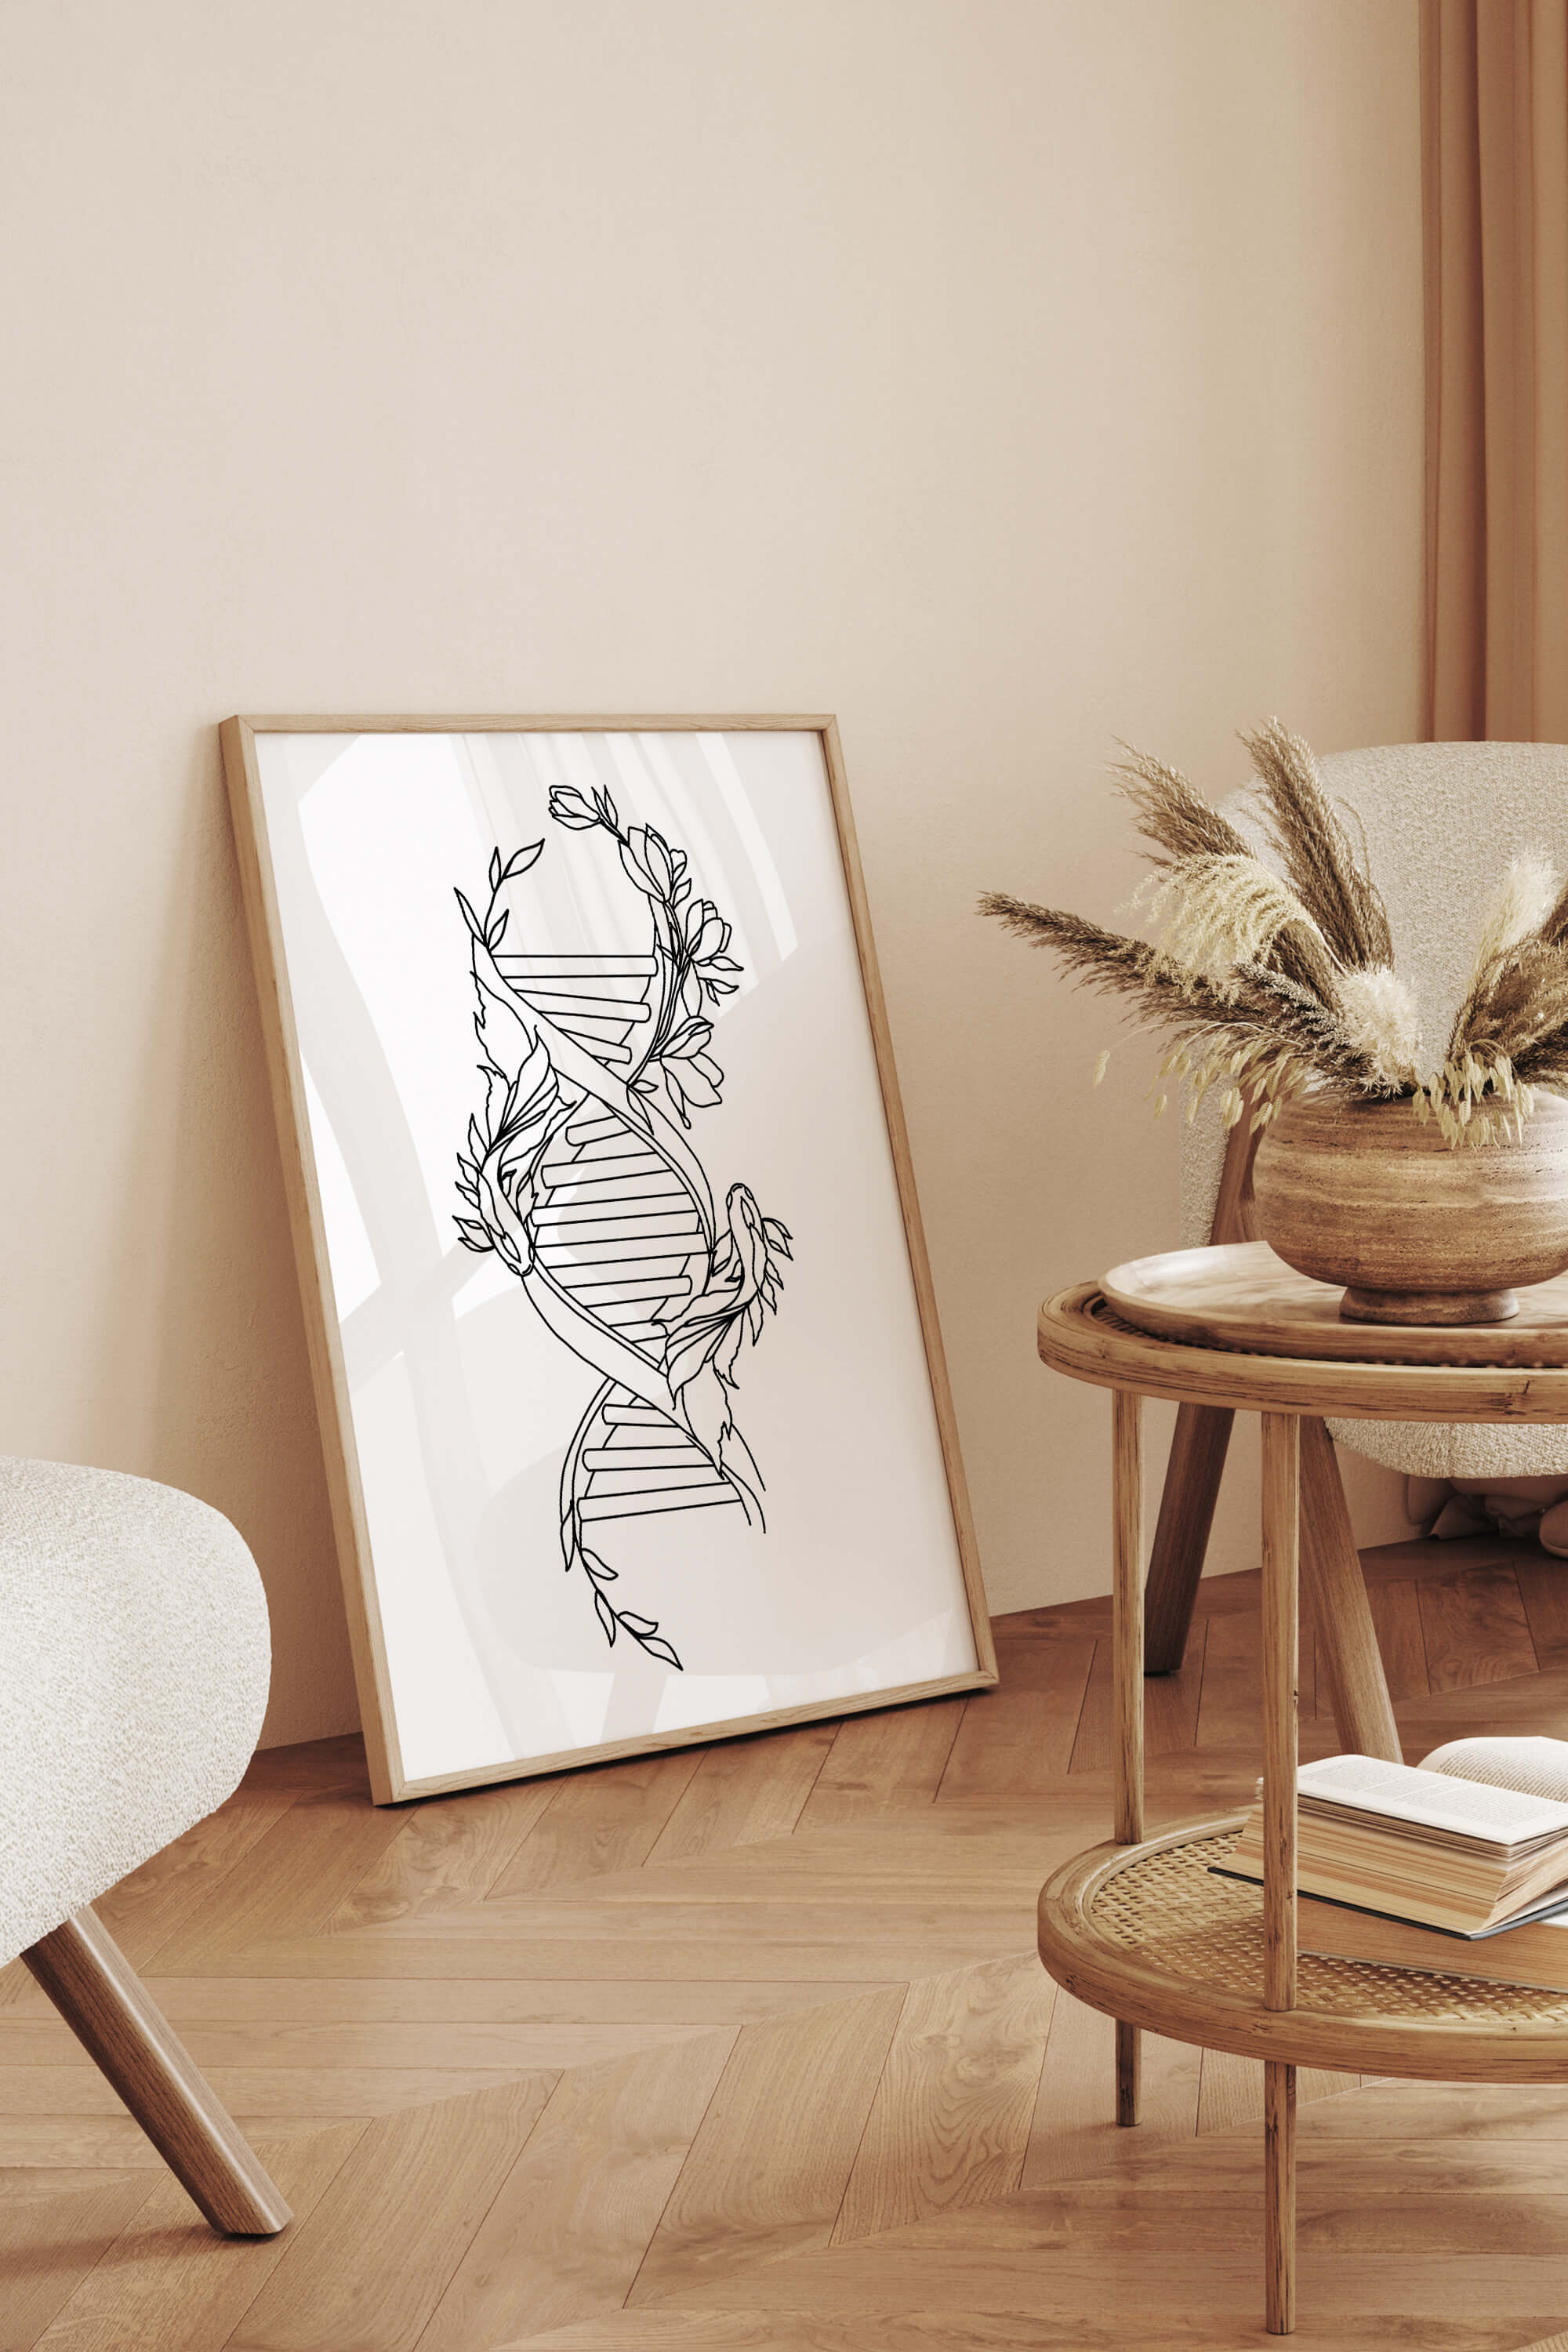 Floral DNA poster, an inspiring gift for biology teachers. Combining art and science appreciation, this unique print adds elegance and knowledge to classroom walls.